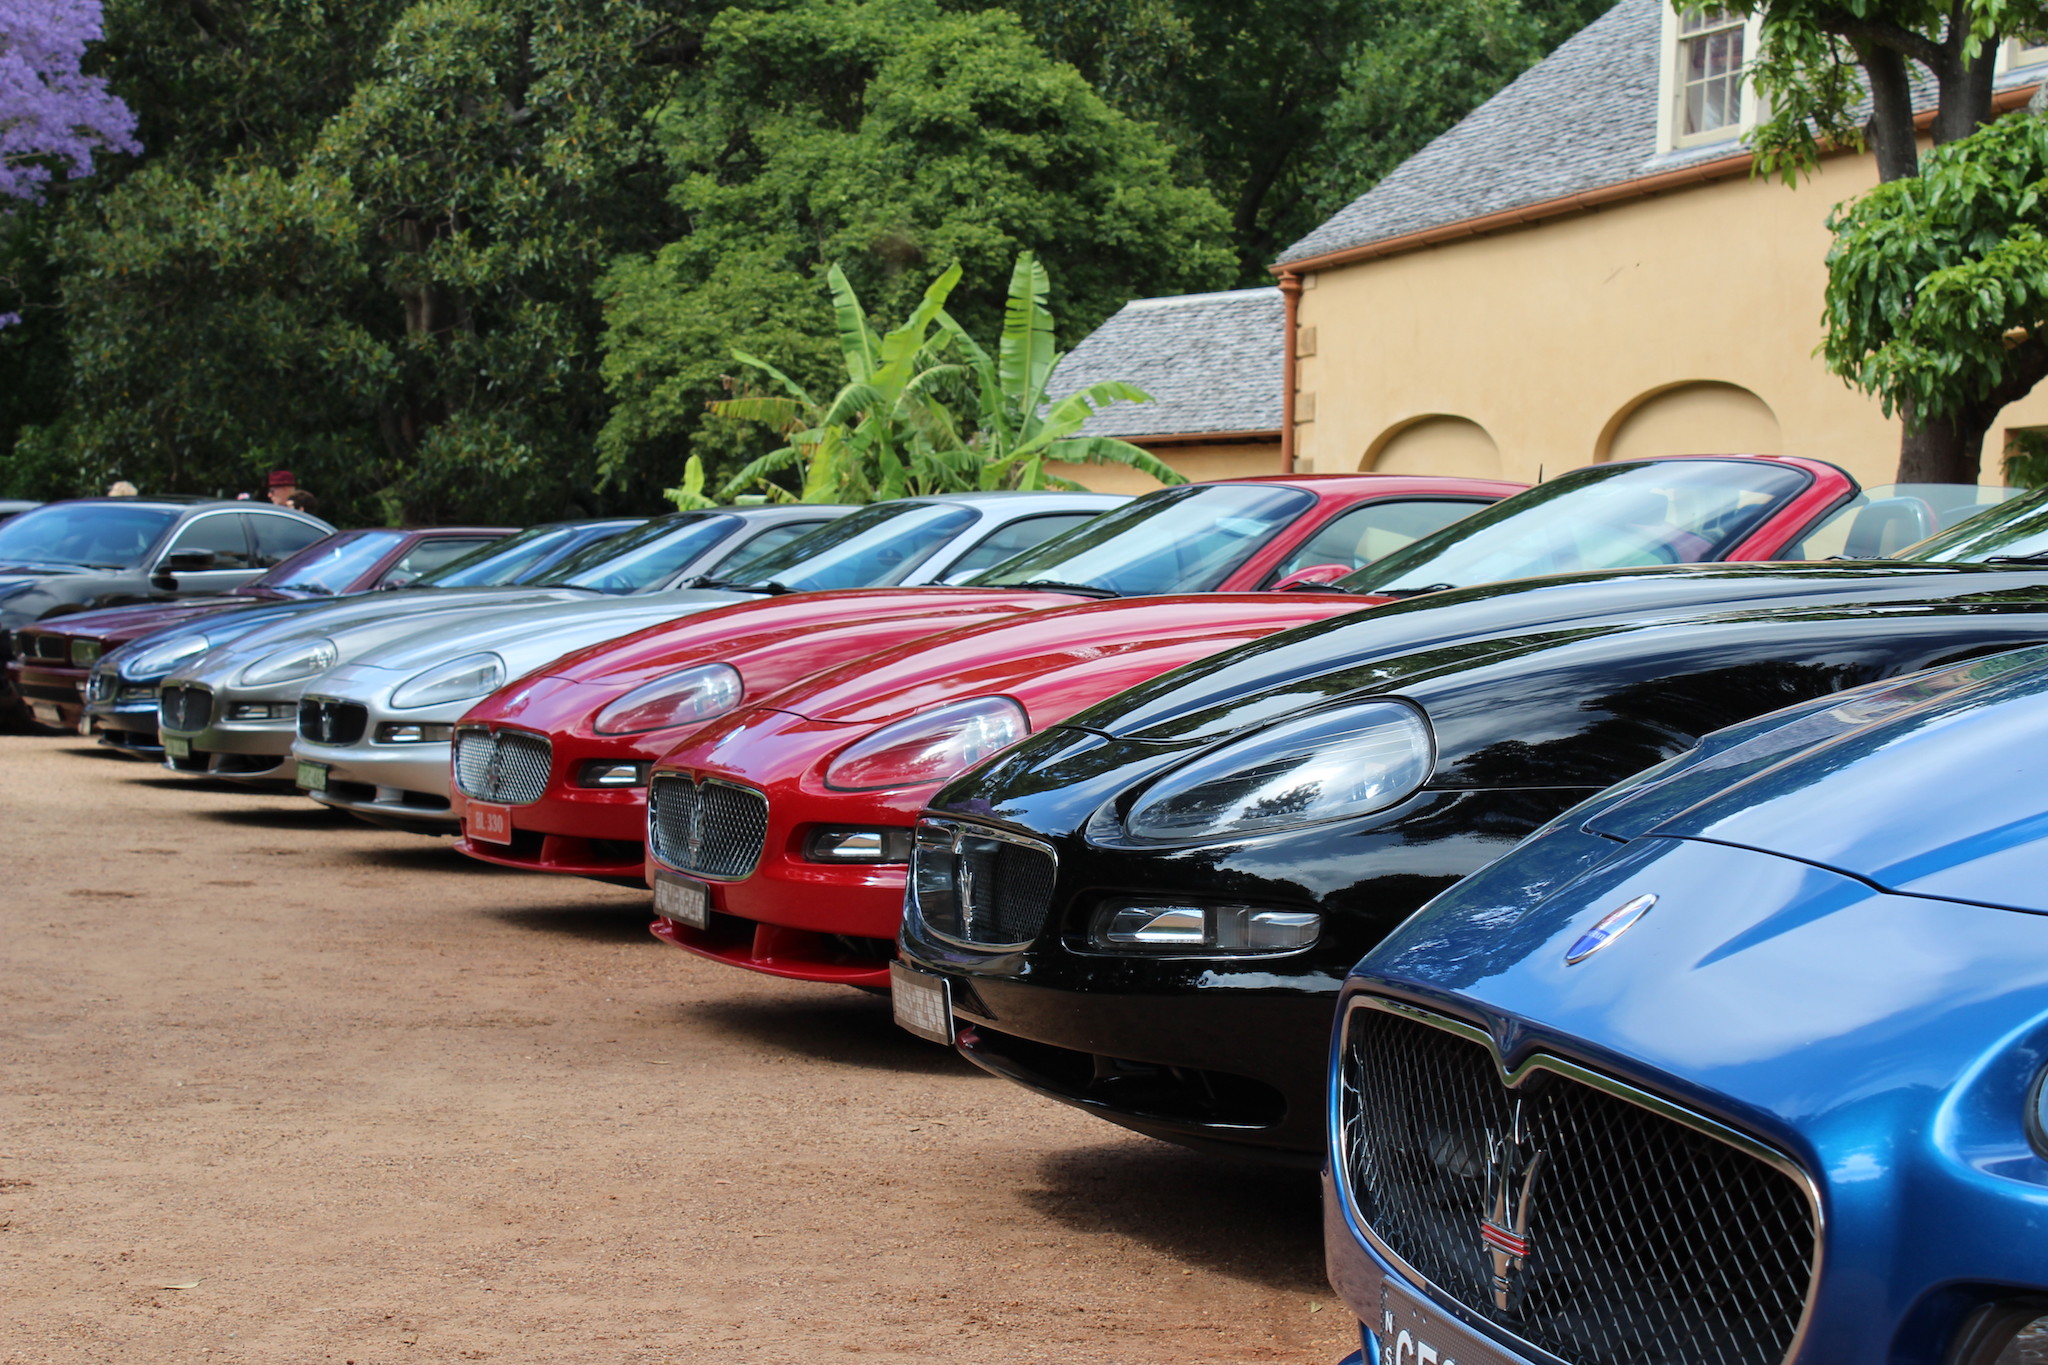 Annual Picnic and Concours d’Elegance